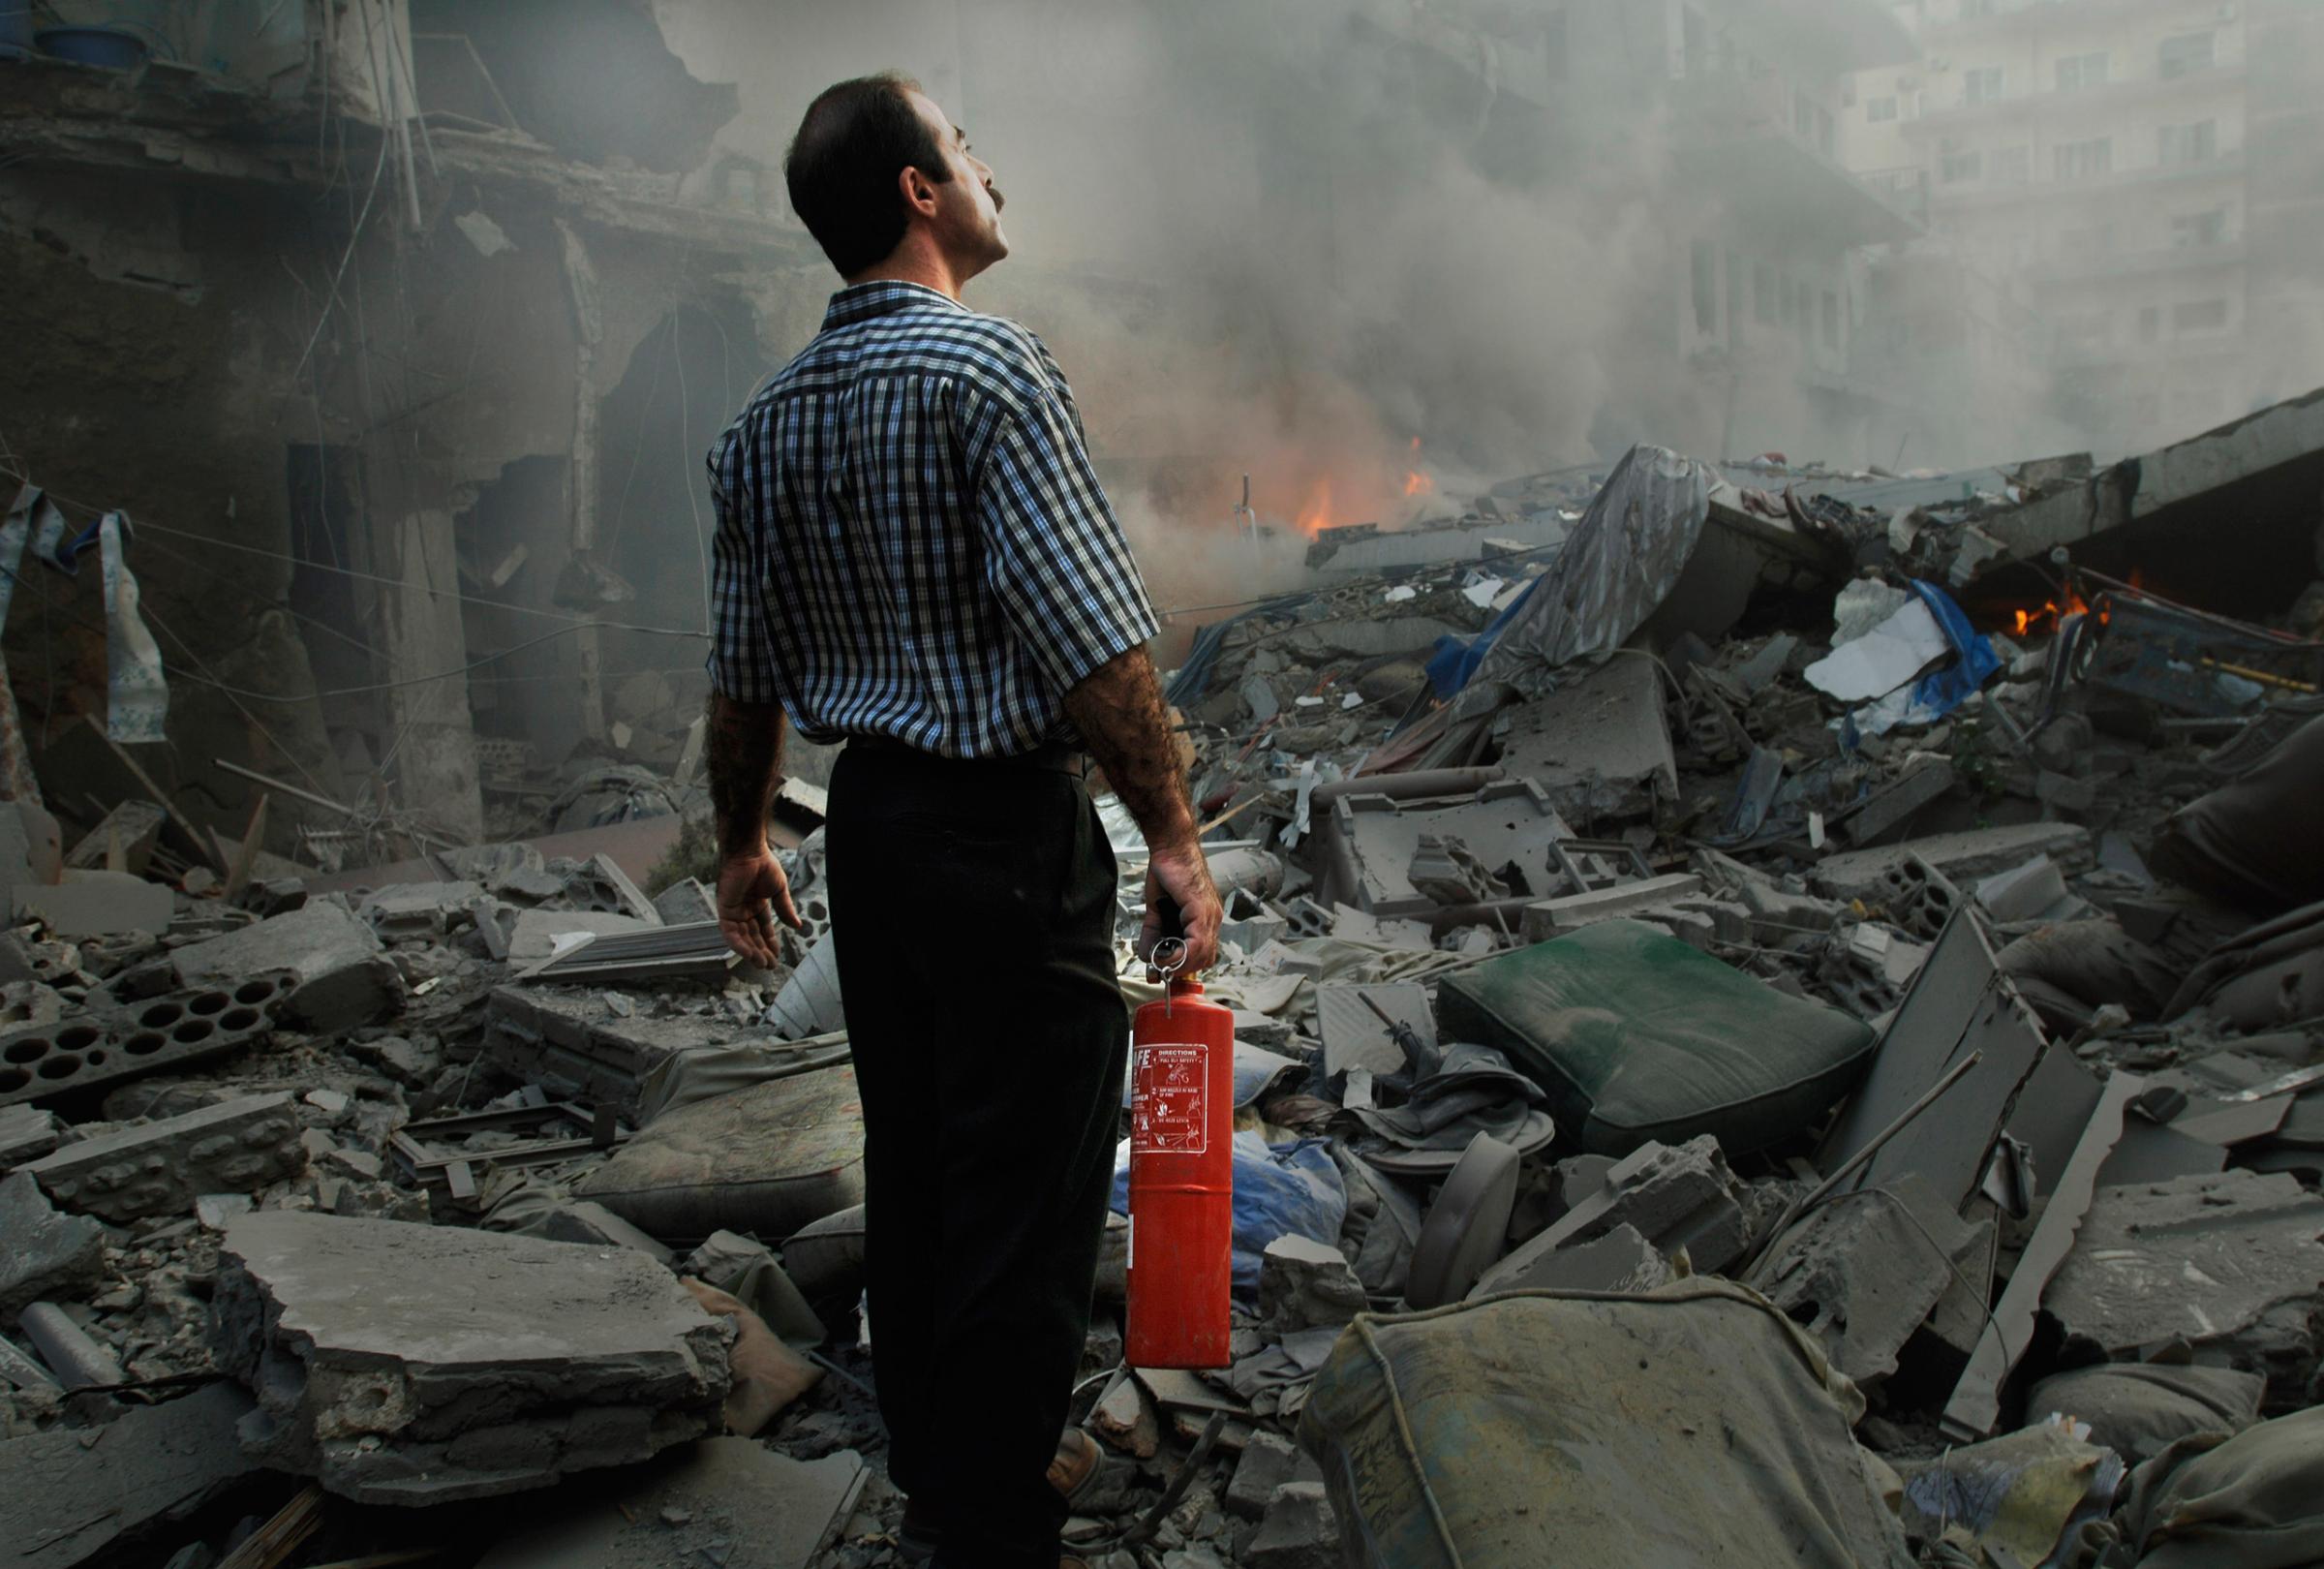 Jeroen Oerlemans, A man looks in despair at the rubble of a six storey apartment building just after it was bombed, realising his small fire extinguisher is not going to be of any use. The building, which was attacked by the Israeli air force, was in the middle of a densely populated area in the city of Tyre.